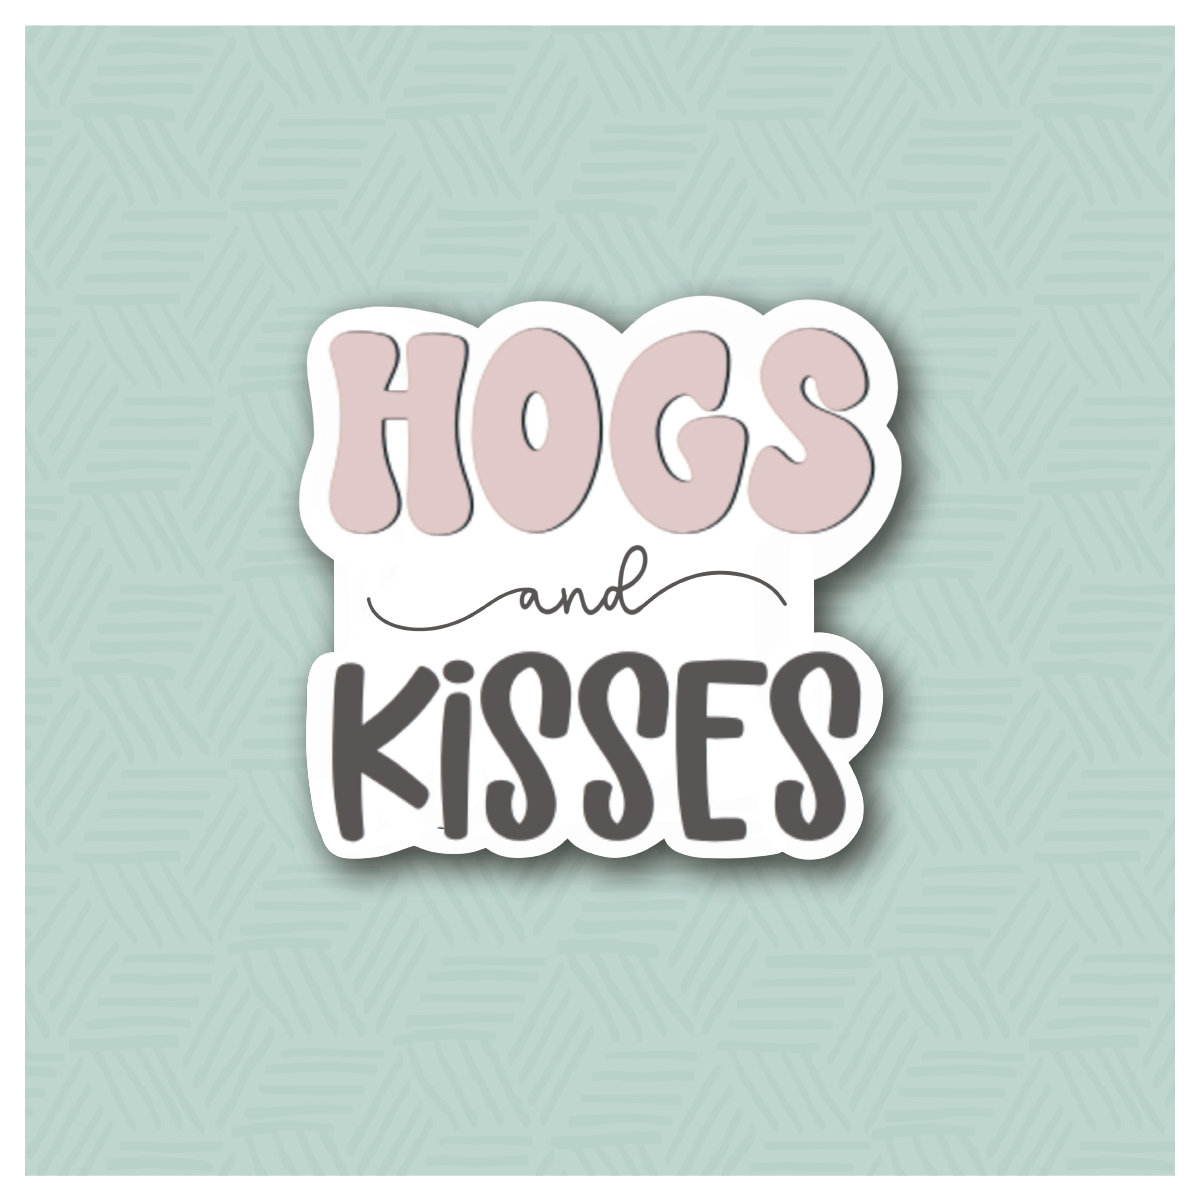 Hogs and Kisses Hand Lettered Cookie Cutter